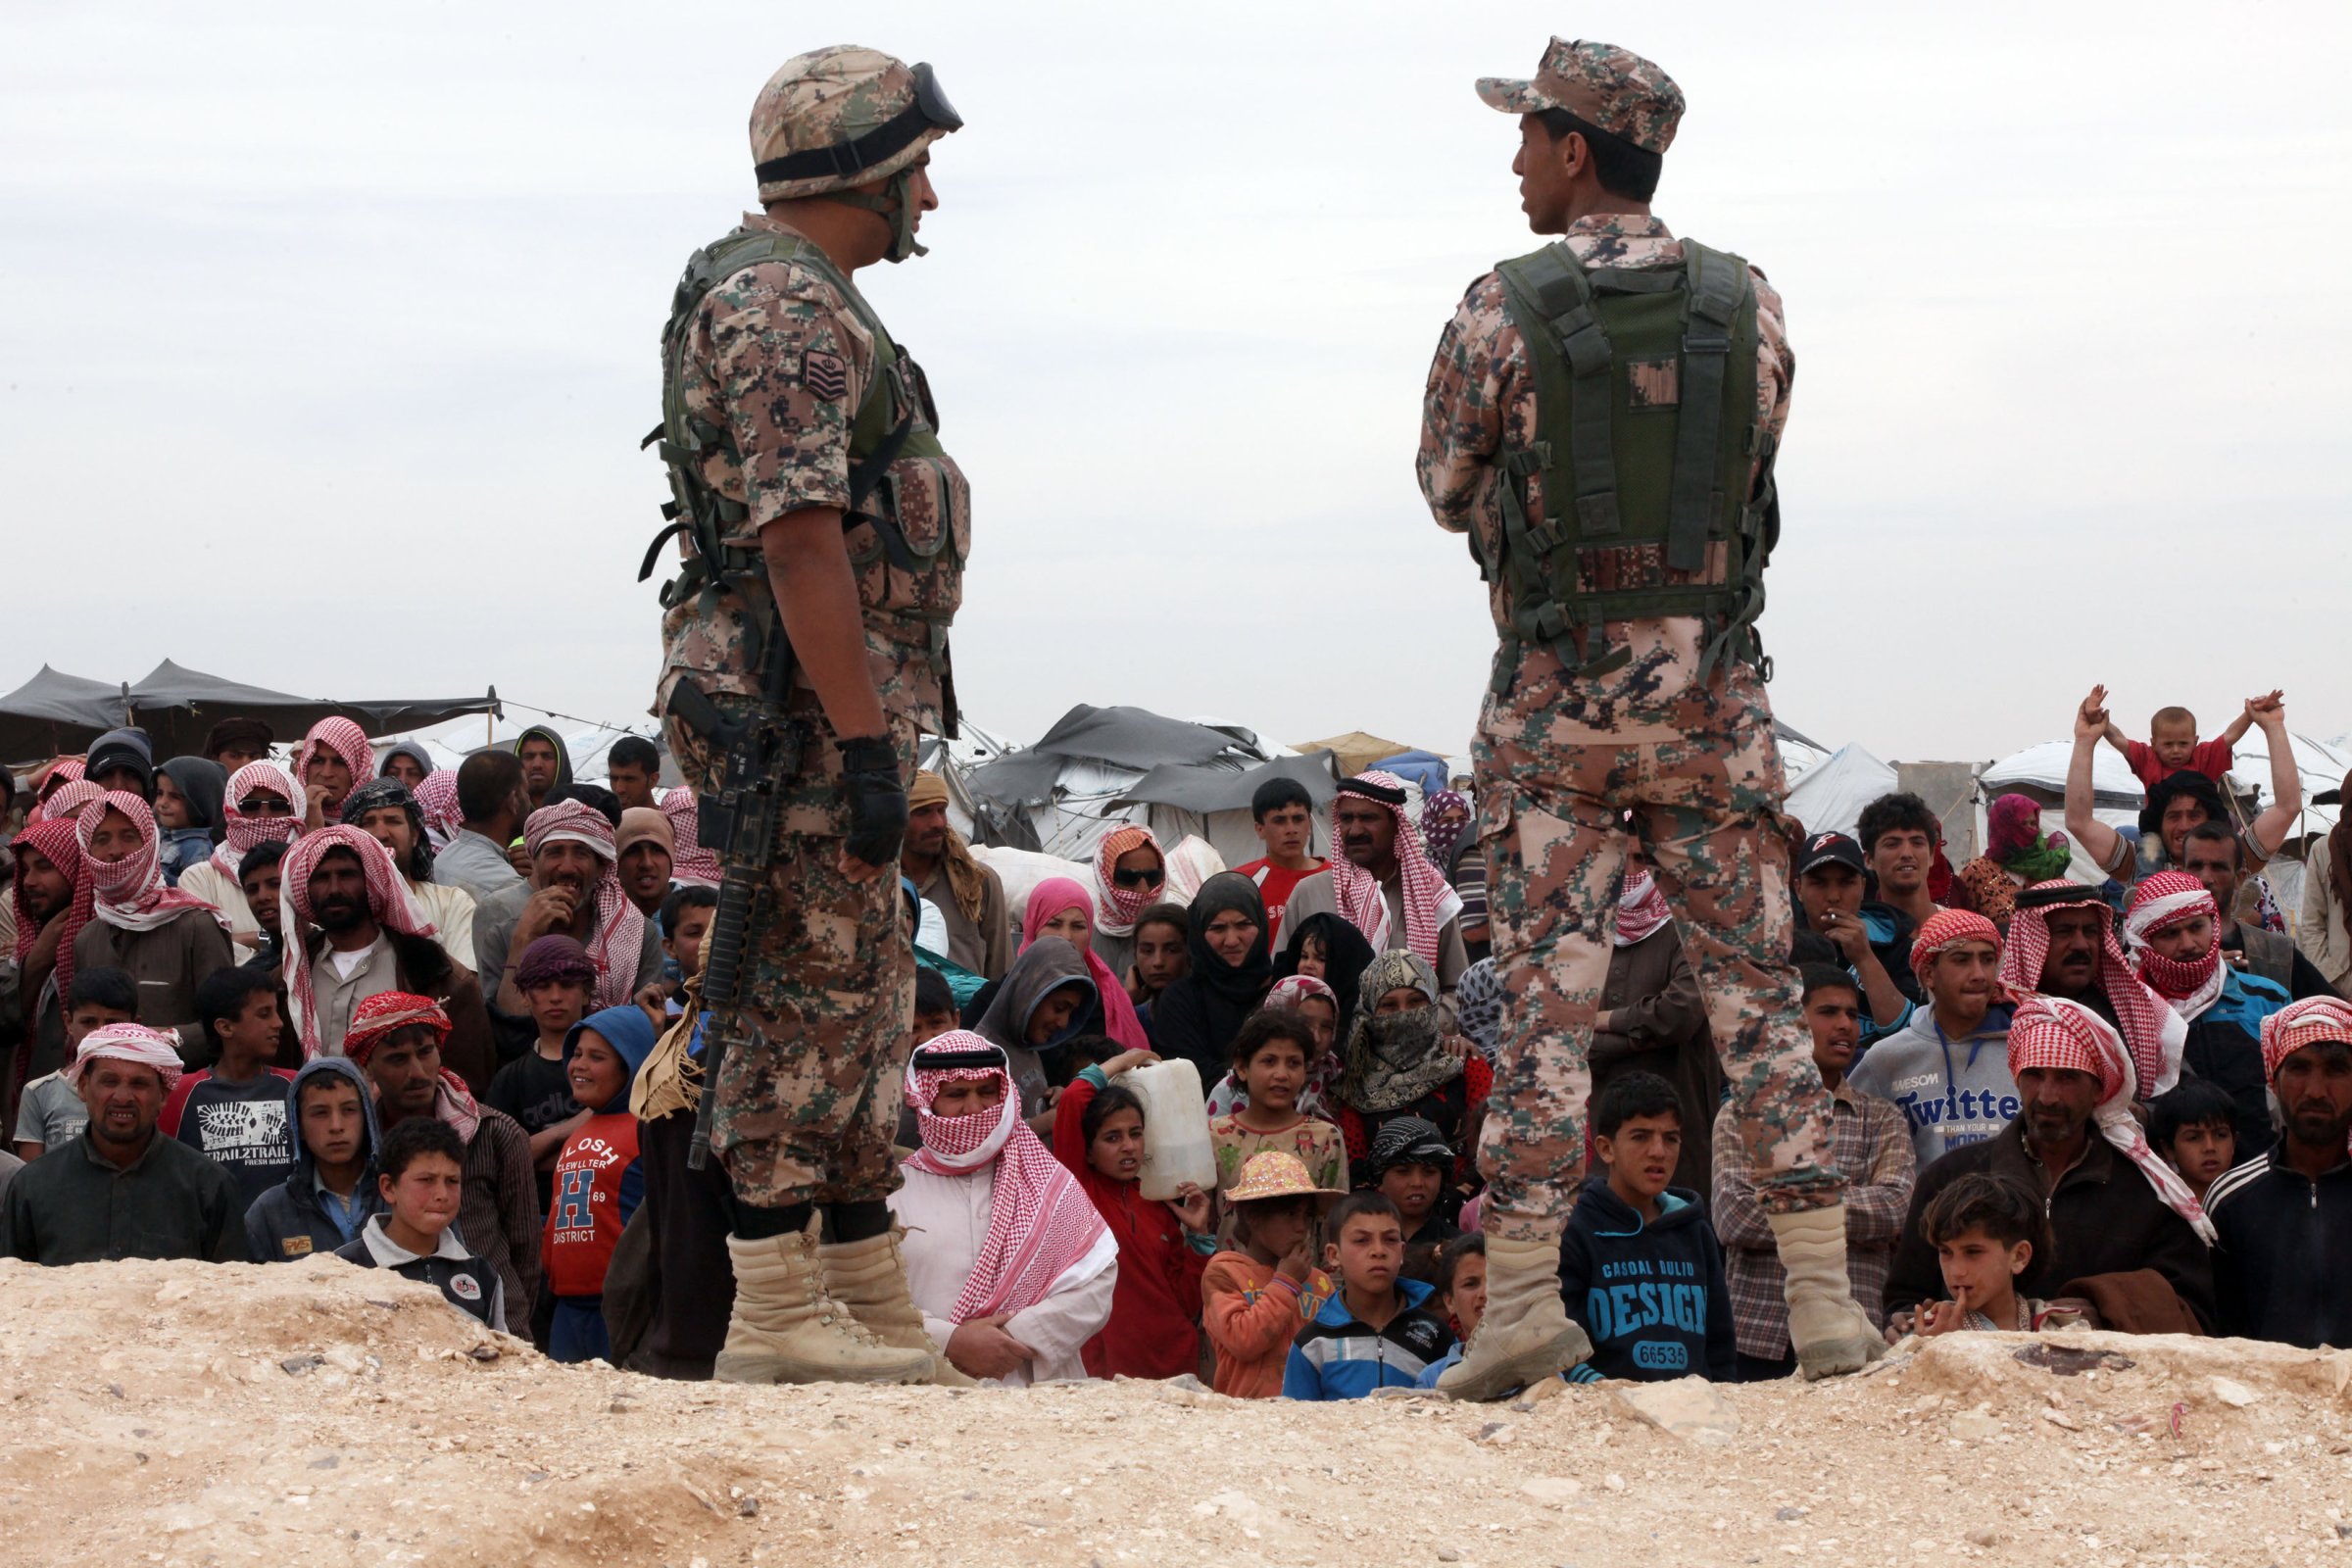 Soldiers stand near Syrian refugees who have arrived at the Jordanian military crossing point of Hadalat at the border with Syria after a long walk through the Syrian desert in Hadalat, Jordan, on May 4, 2016.